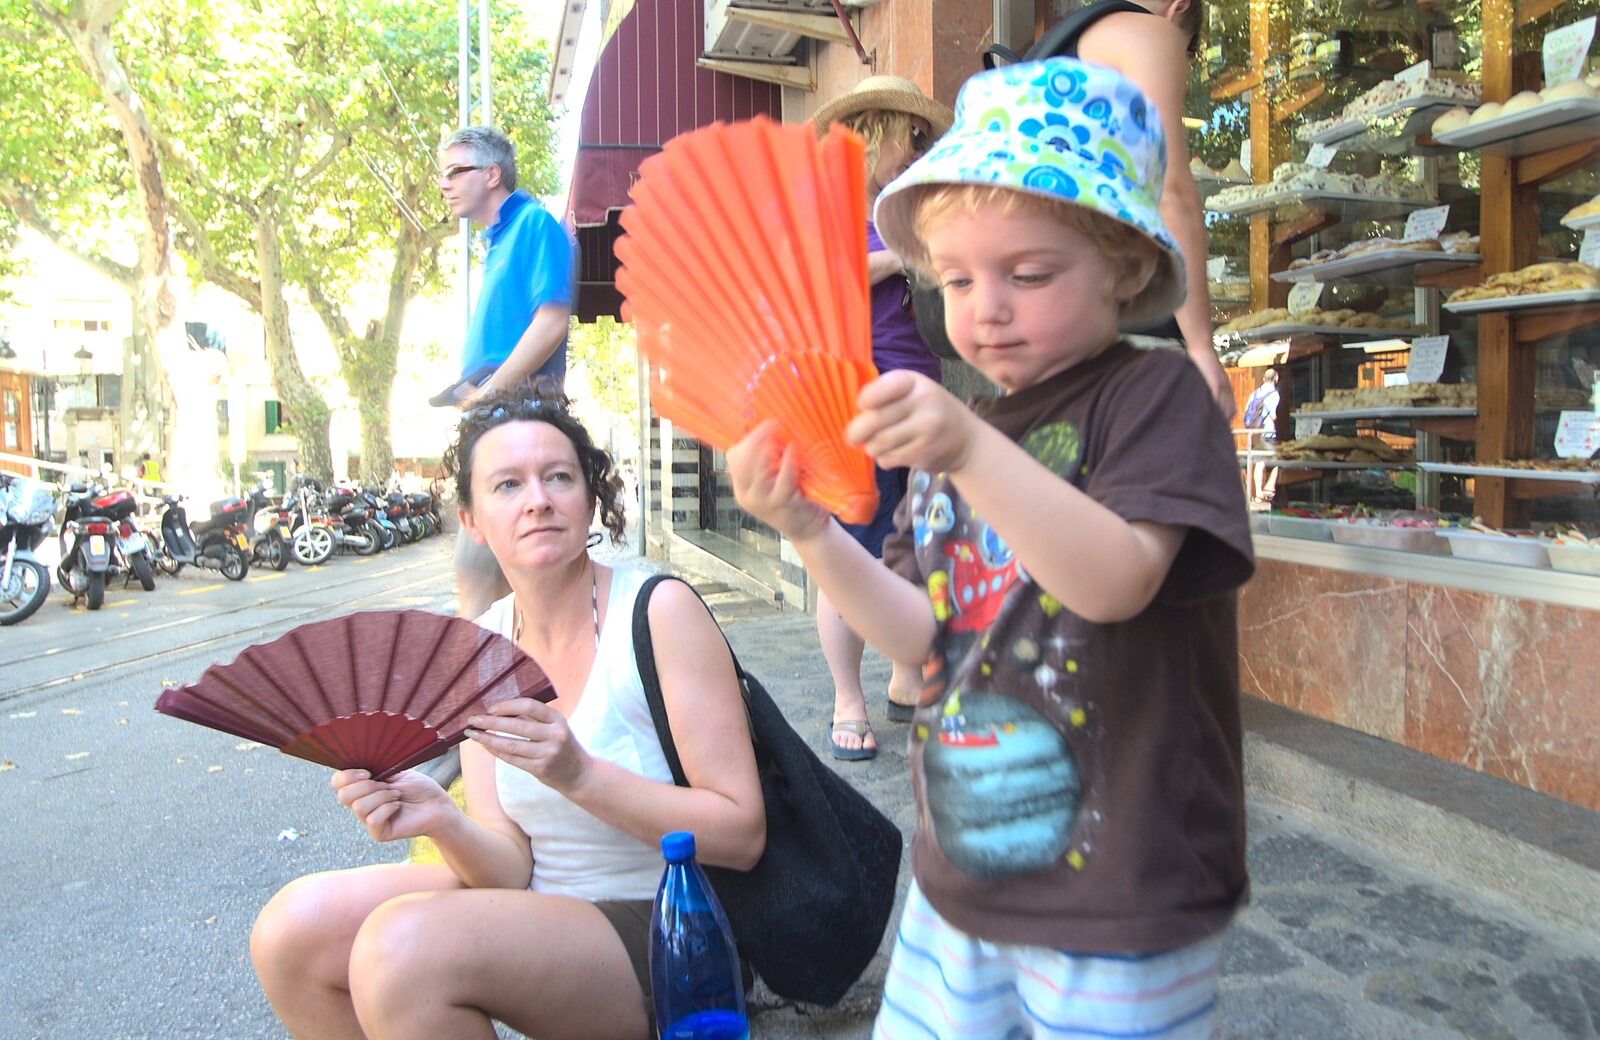 Fred's got a fan from A Tram Trip to Port Soller, Mallorca - 18th August 2011